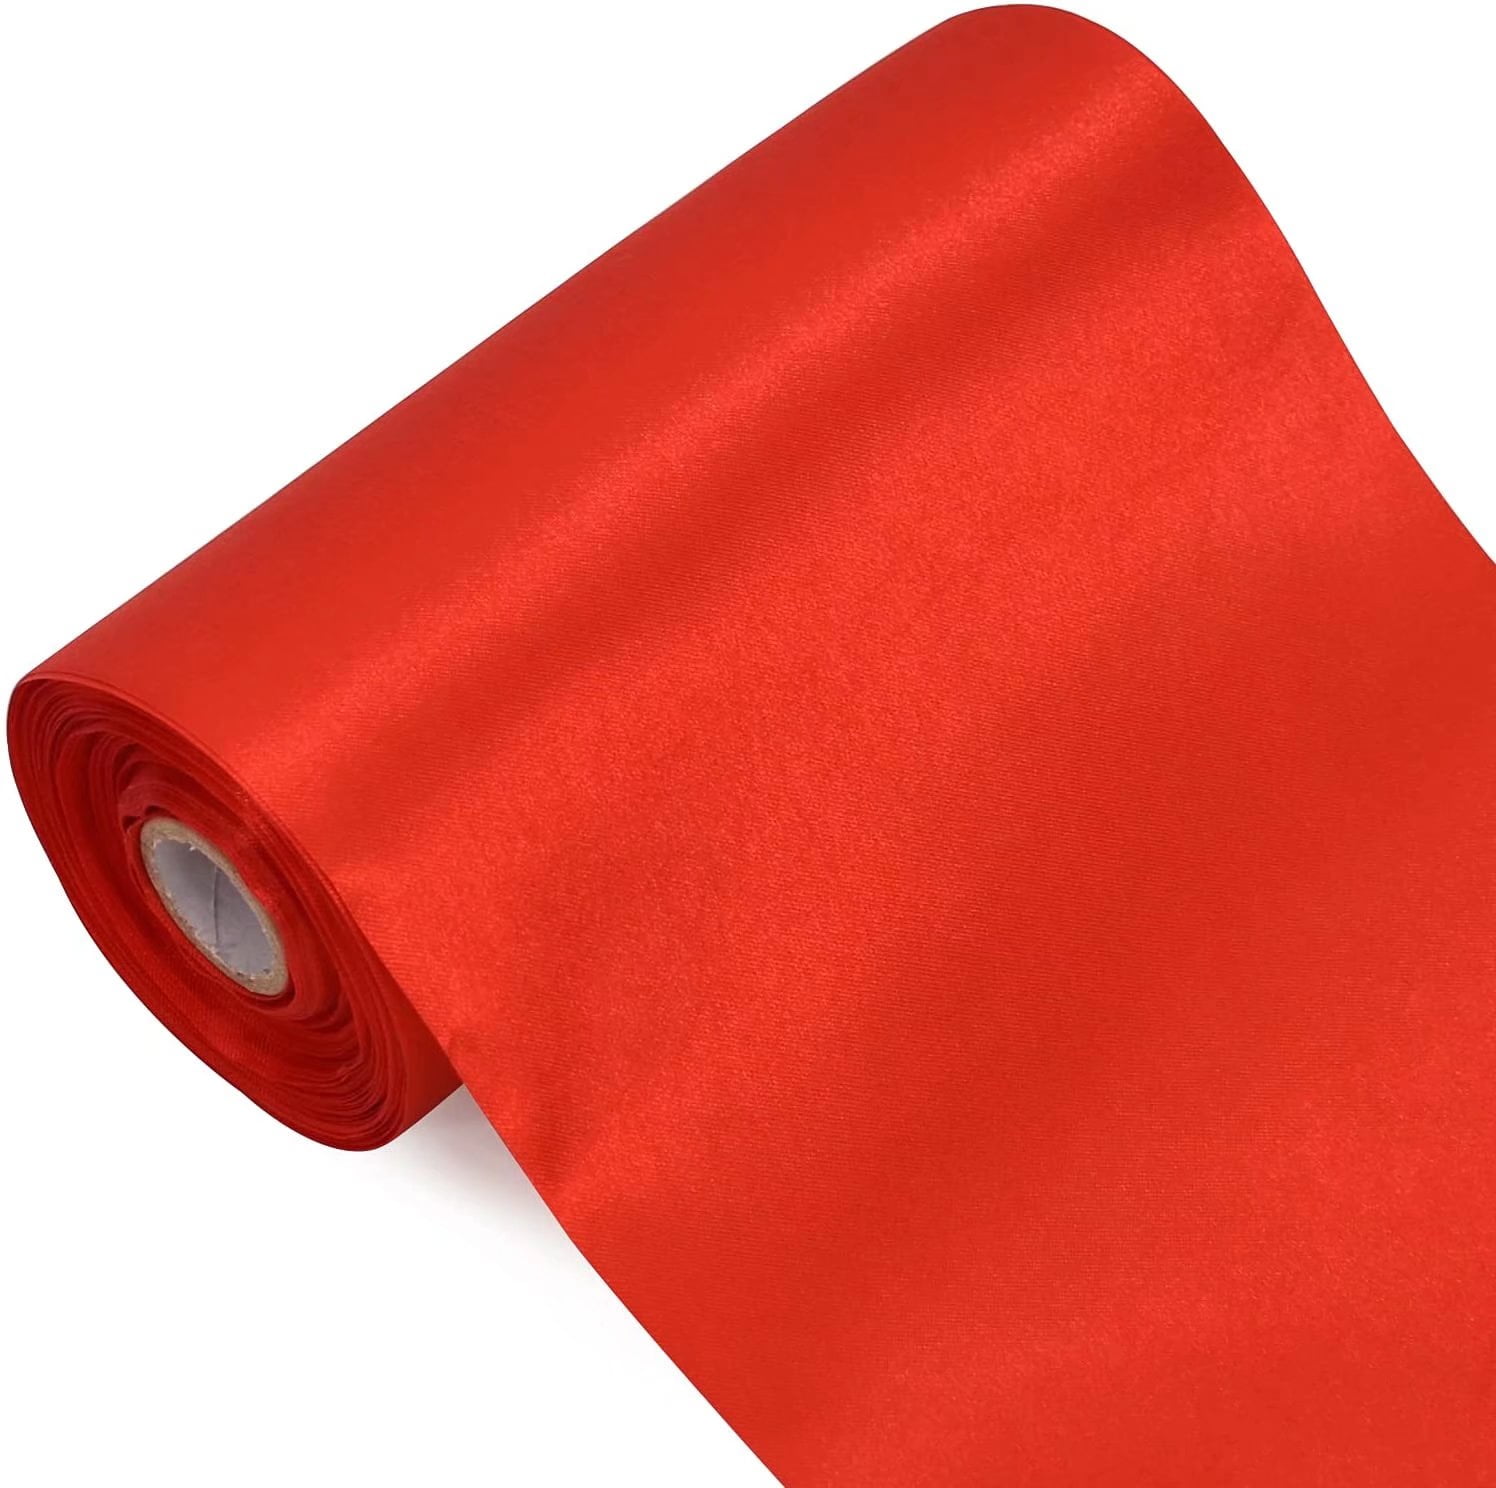 TONIFUL 1-1/2 Inch (40mm) x 100 Yard Orange Wide Satin Ribbon Solid Fabric  Ribbon for Gift Wrapping Chair Sash Valentine's Day Wedding Birthday Party